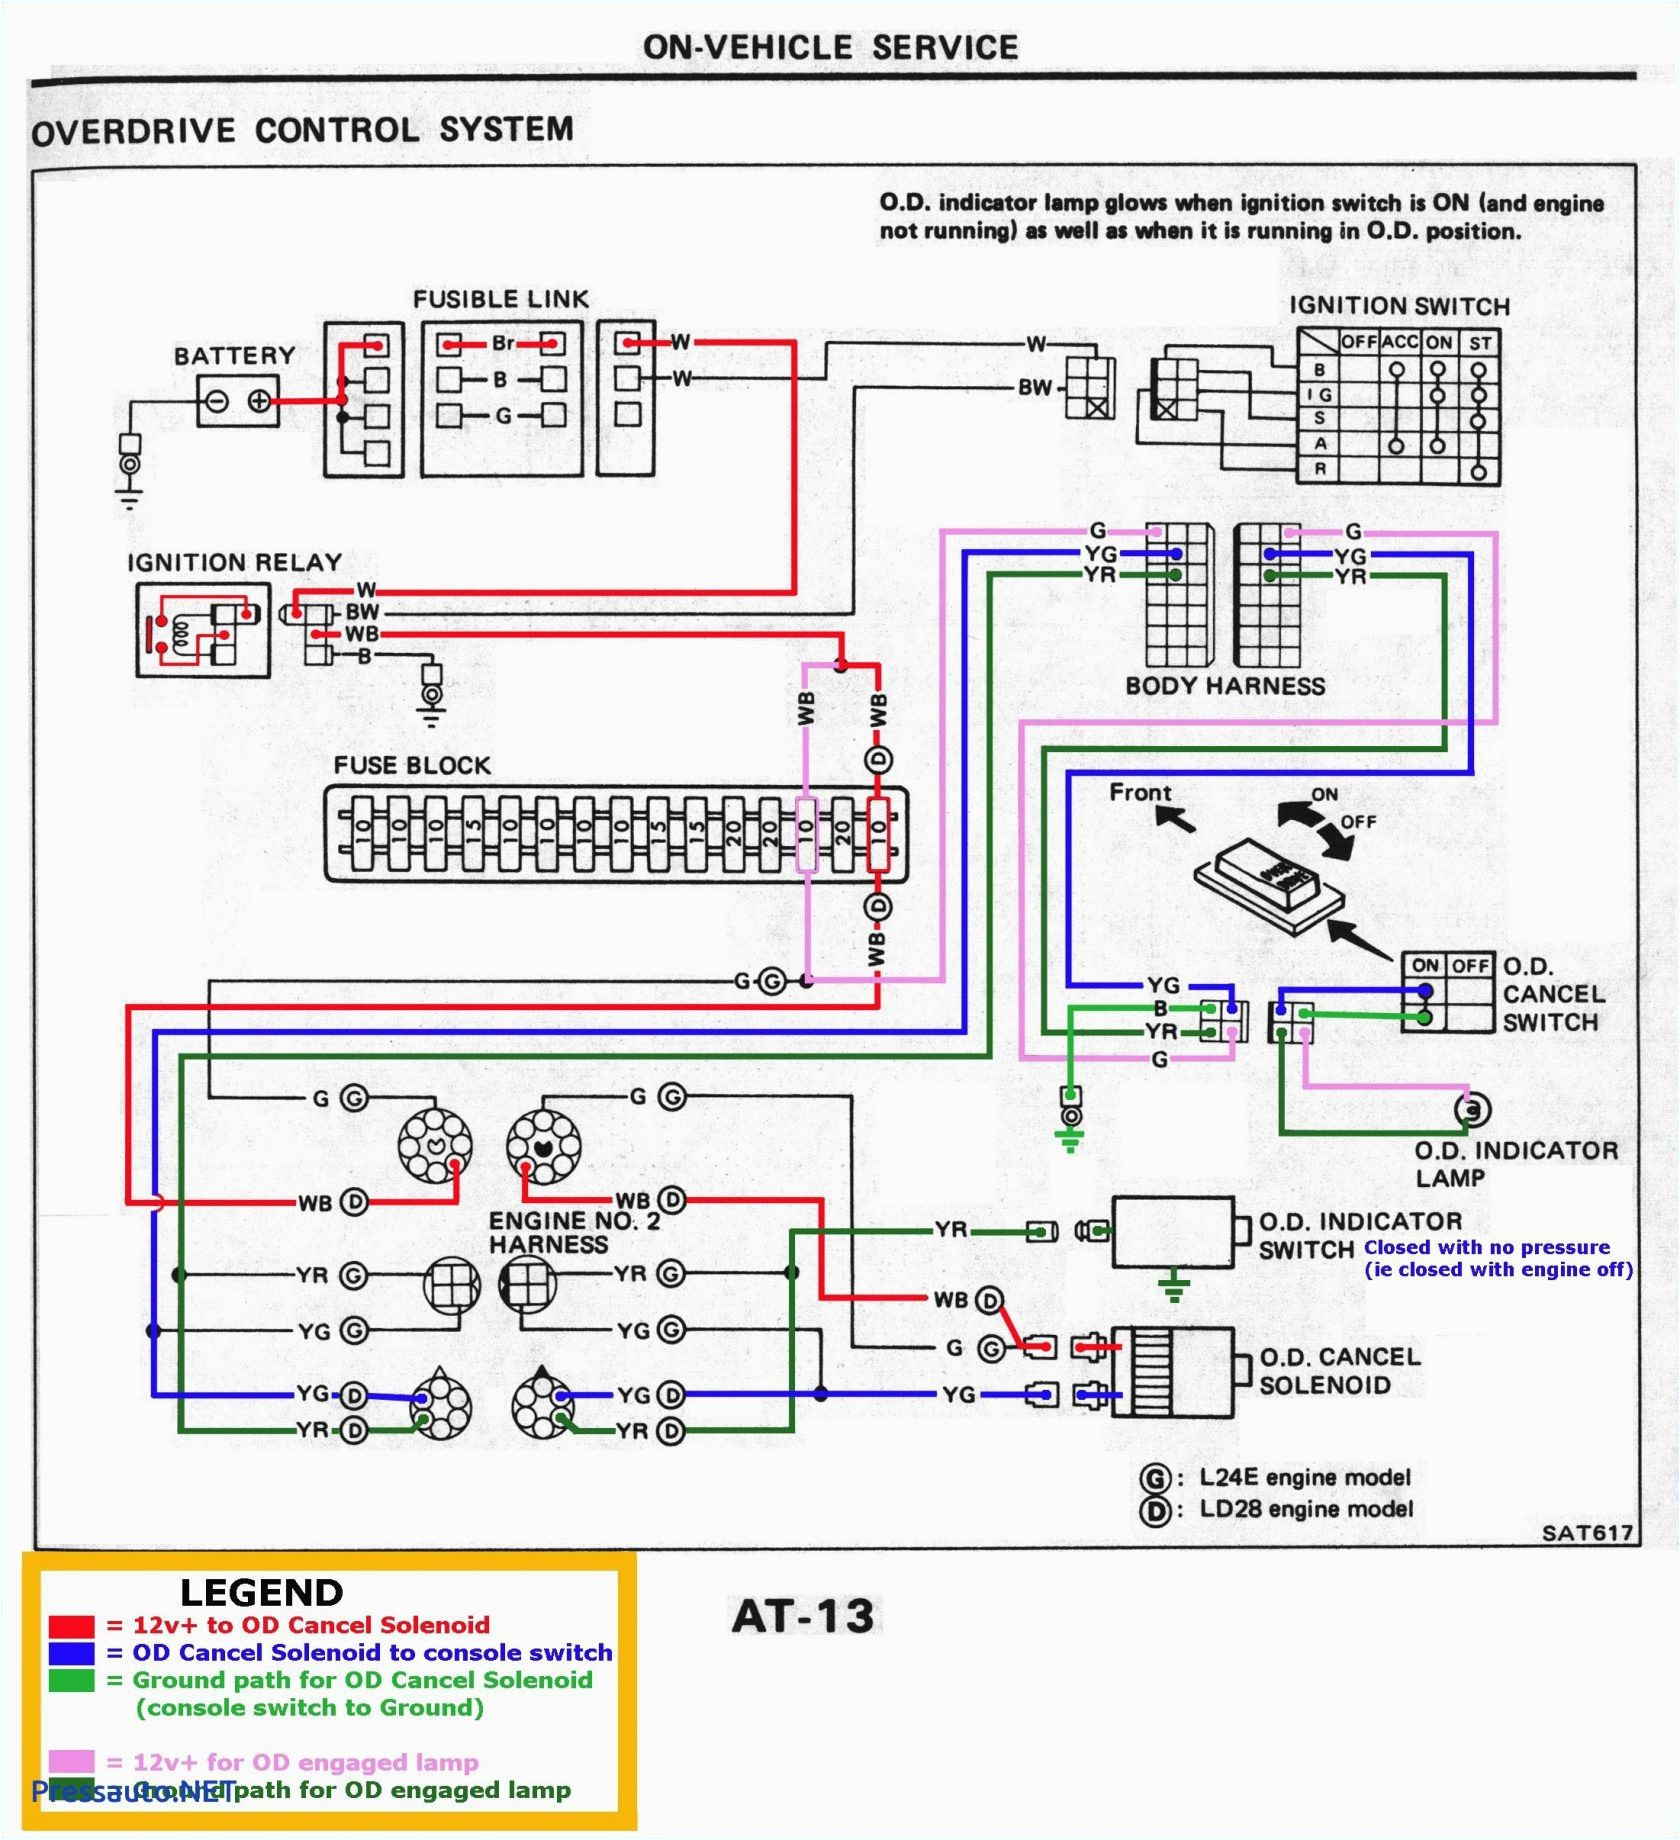 wiring diagram for toyota camry get free image about wiring free wiring diagram for 2007 ford expedition get free image about wiring